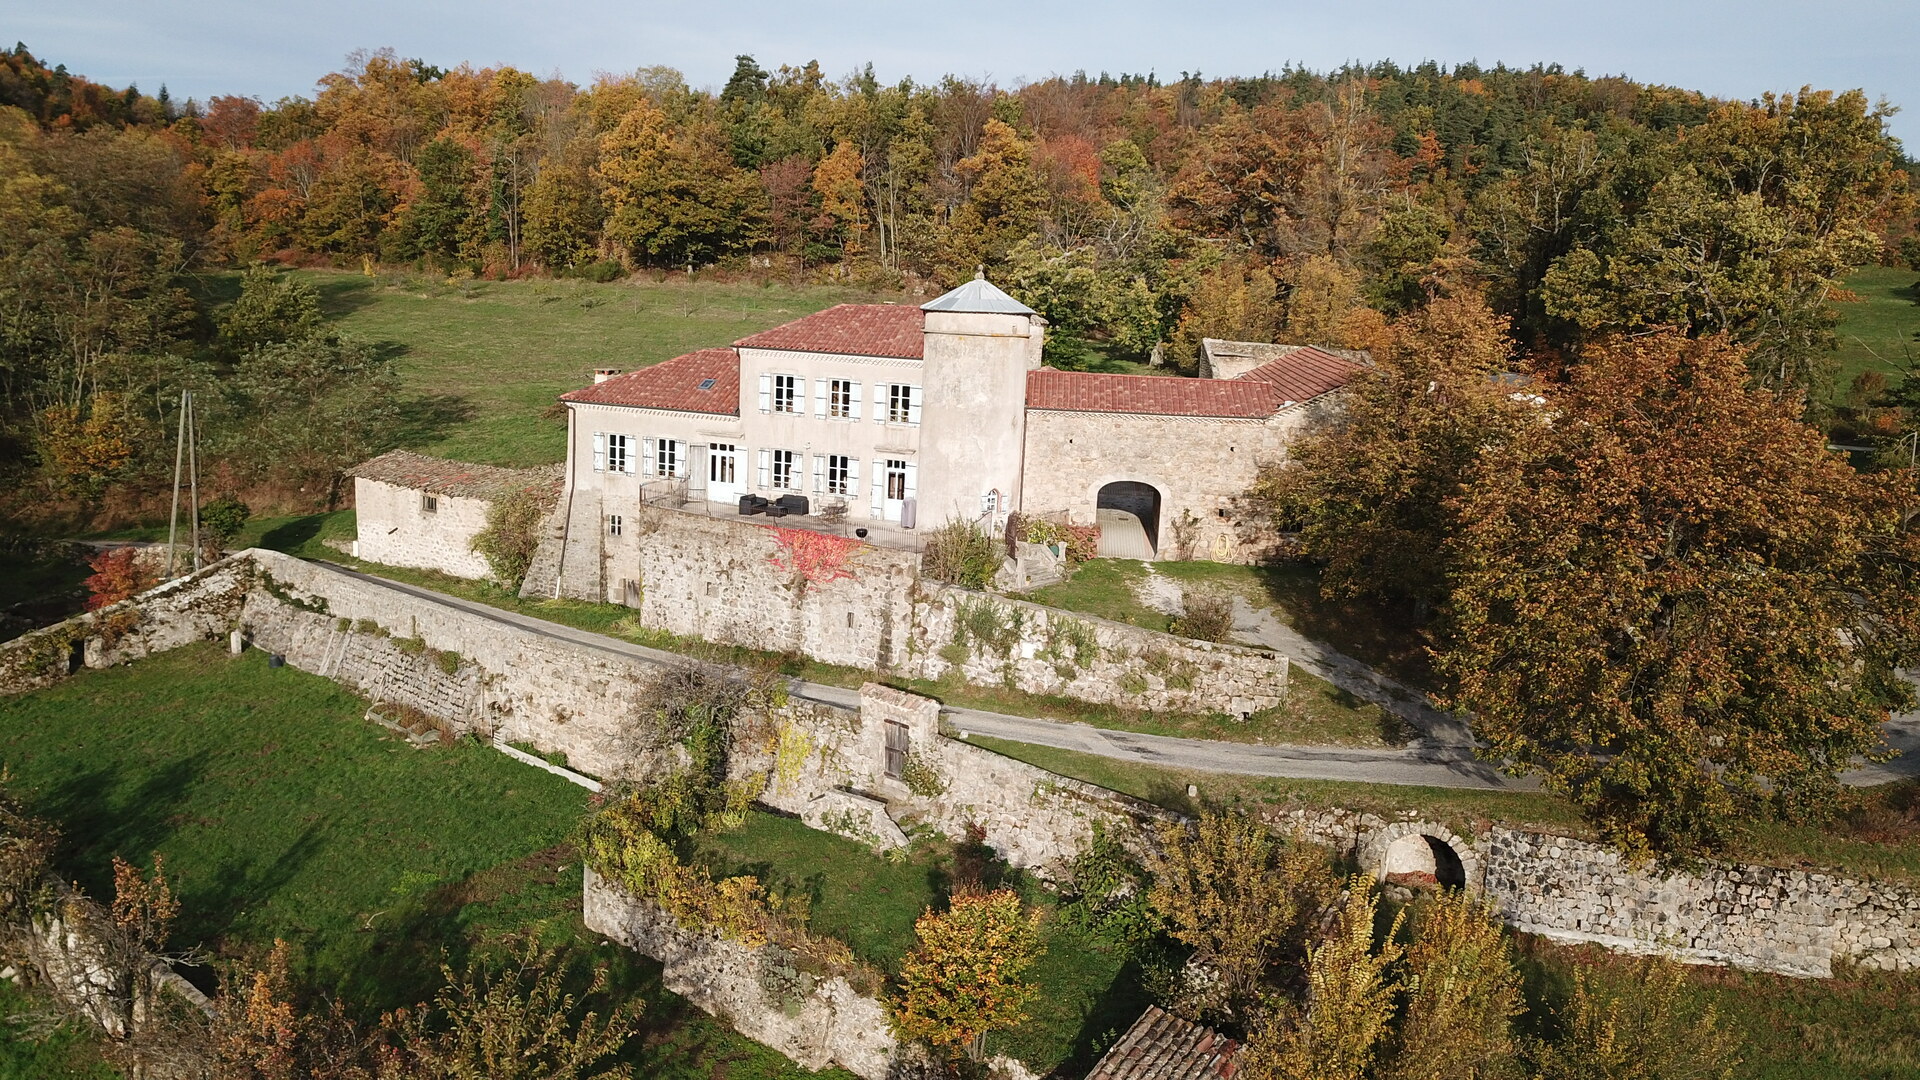 Fontreal is an old fortified house located in the middle of forests and meadows